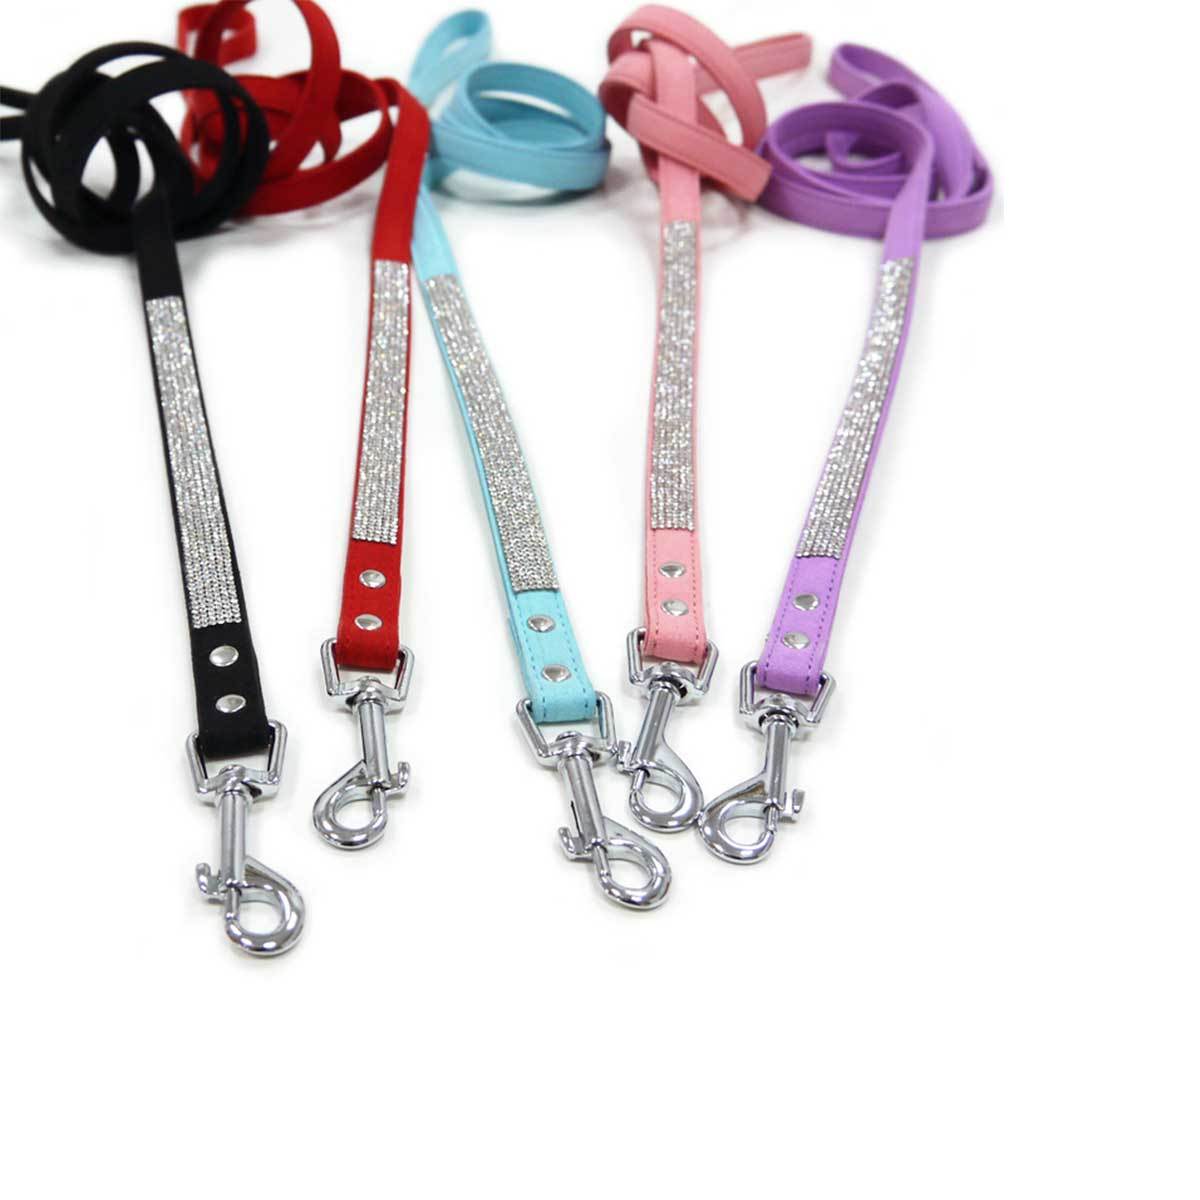 VIP Bling Dog Leash in Black | Pawlicious & Company